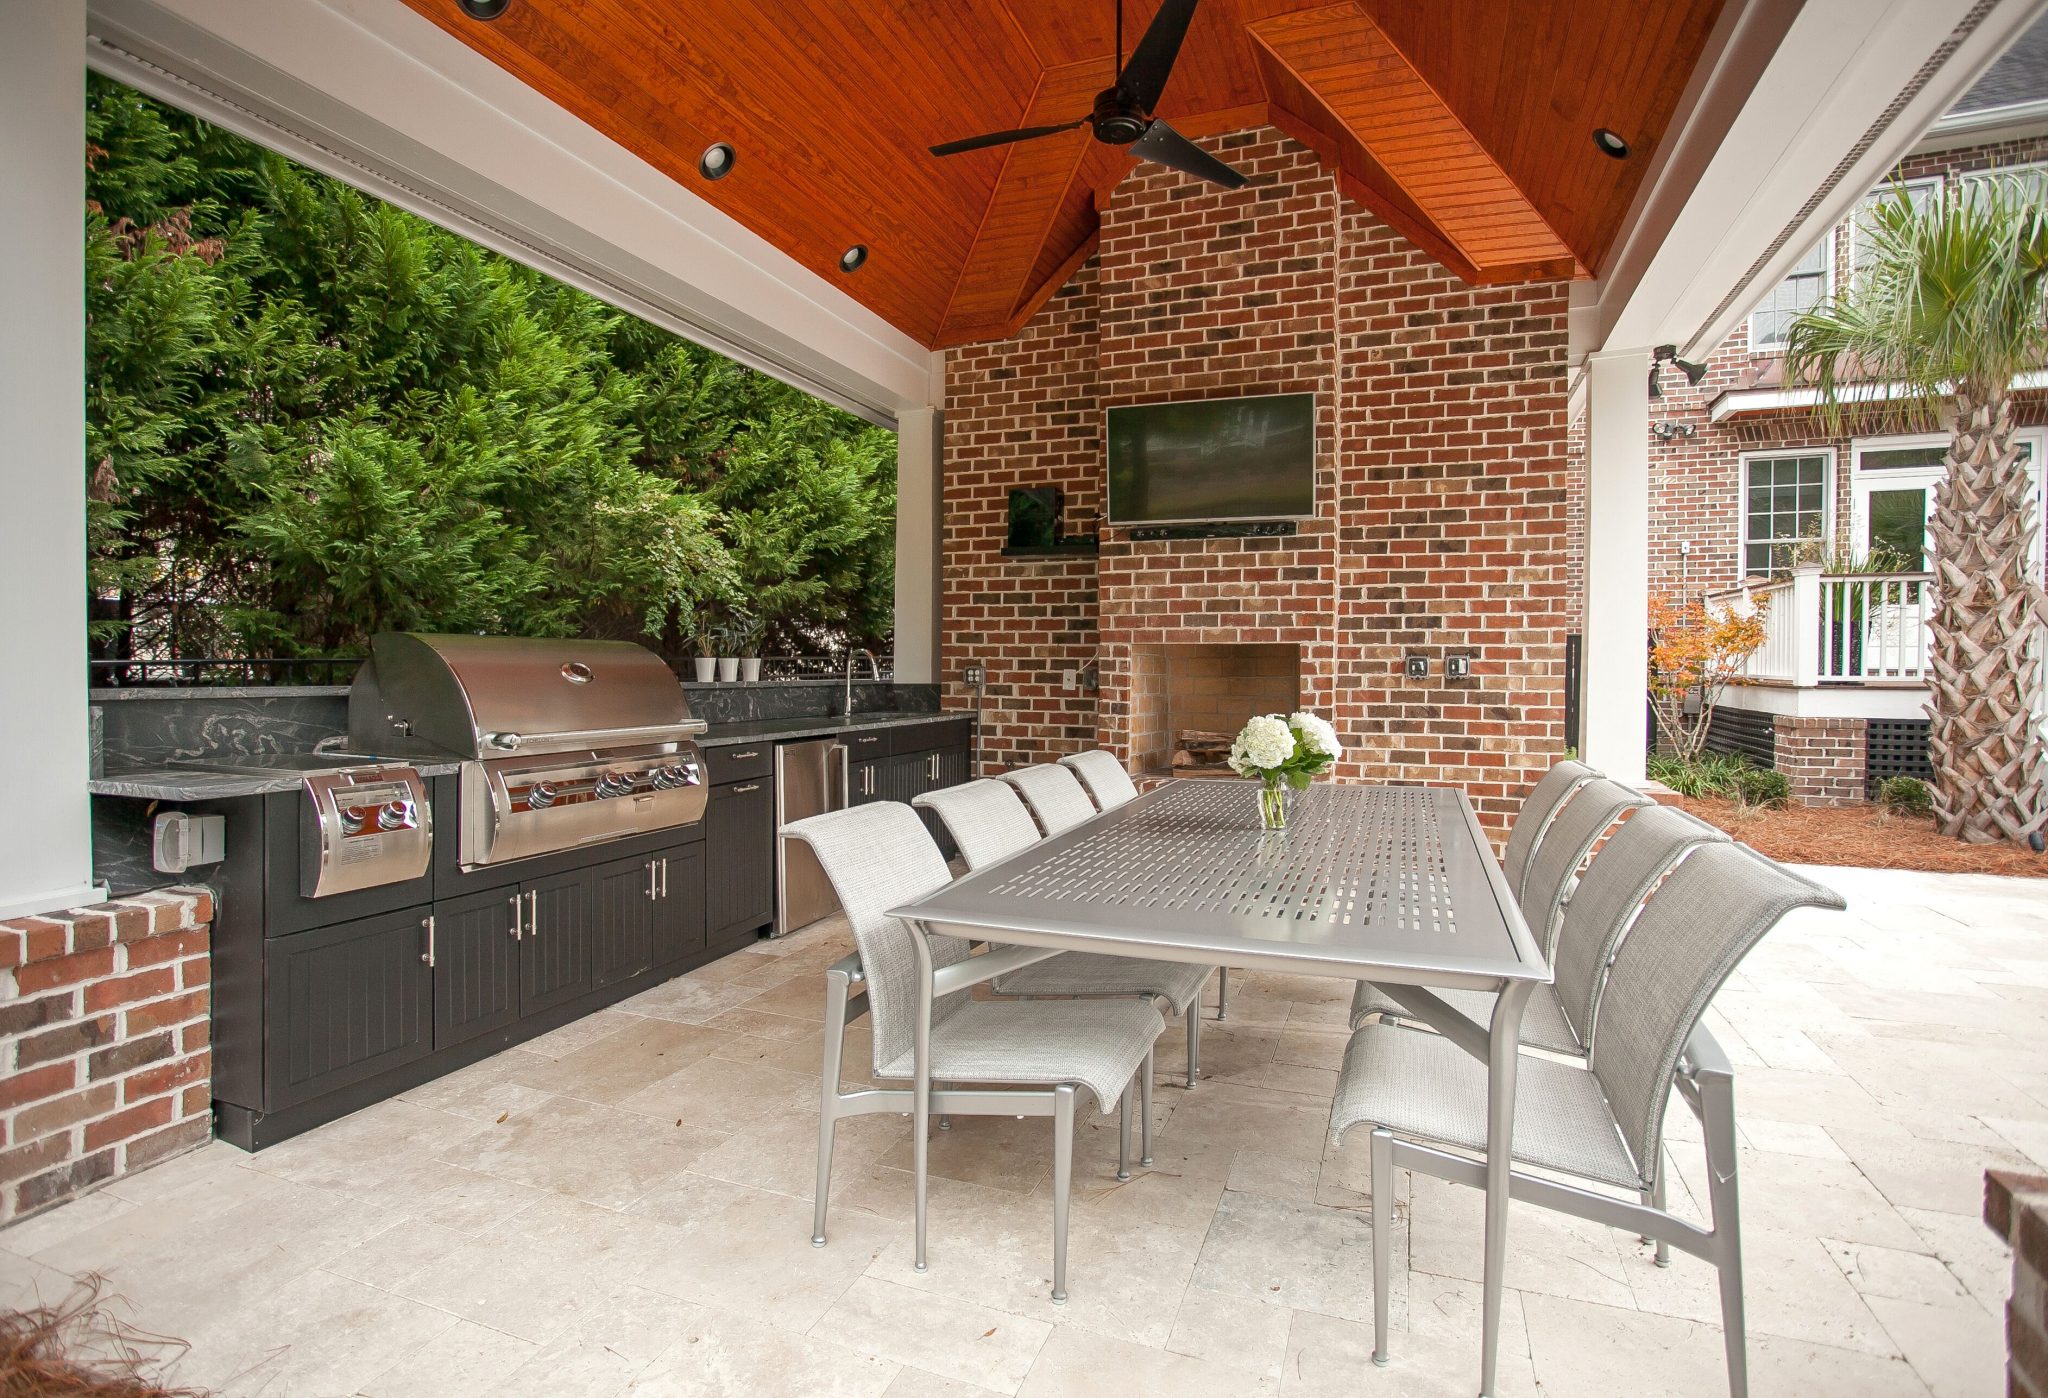 An Outdoor Kitchen Built for a Chef - Charleston Home + Design Magazine